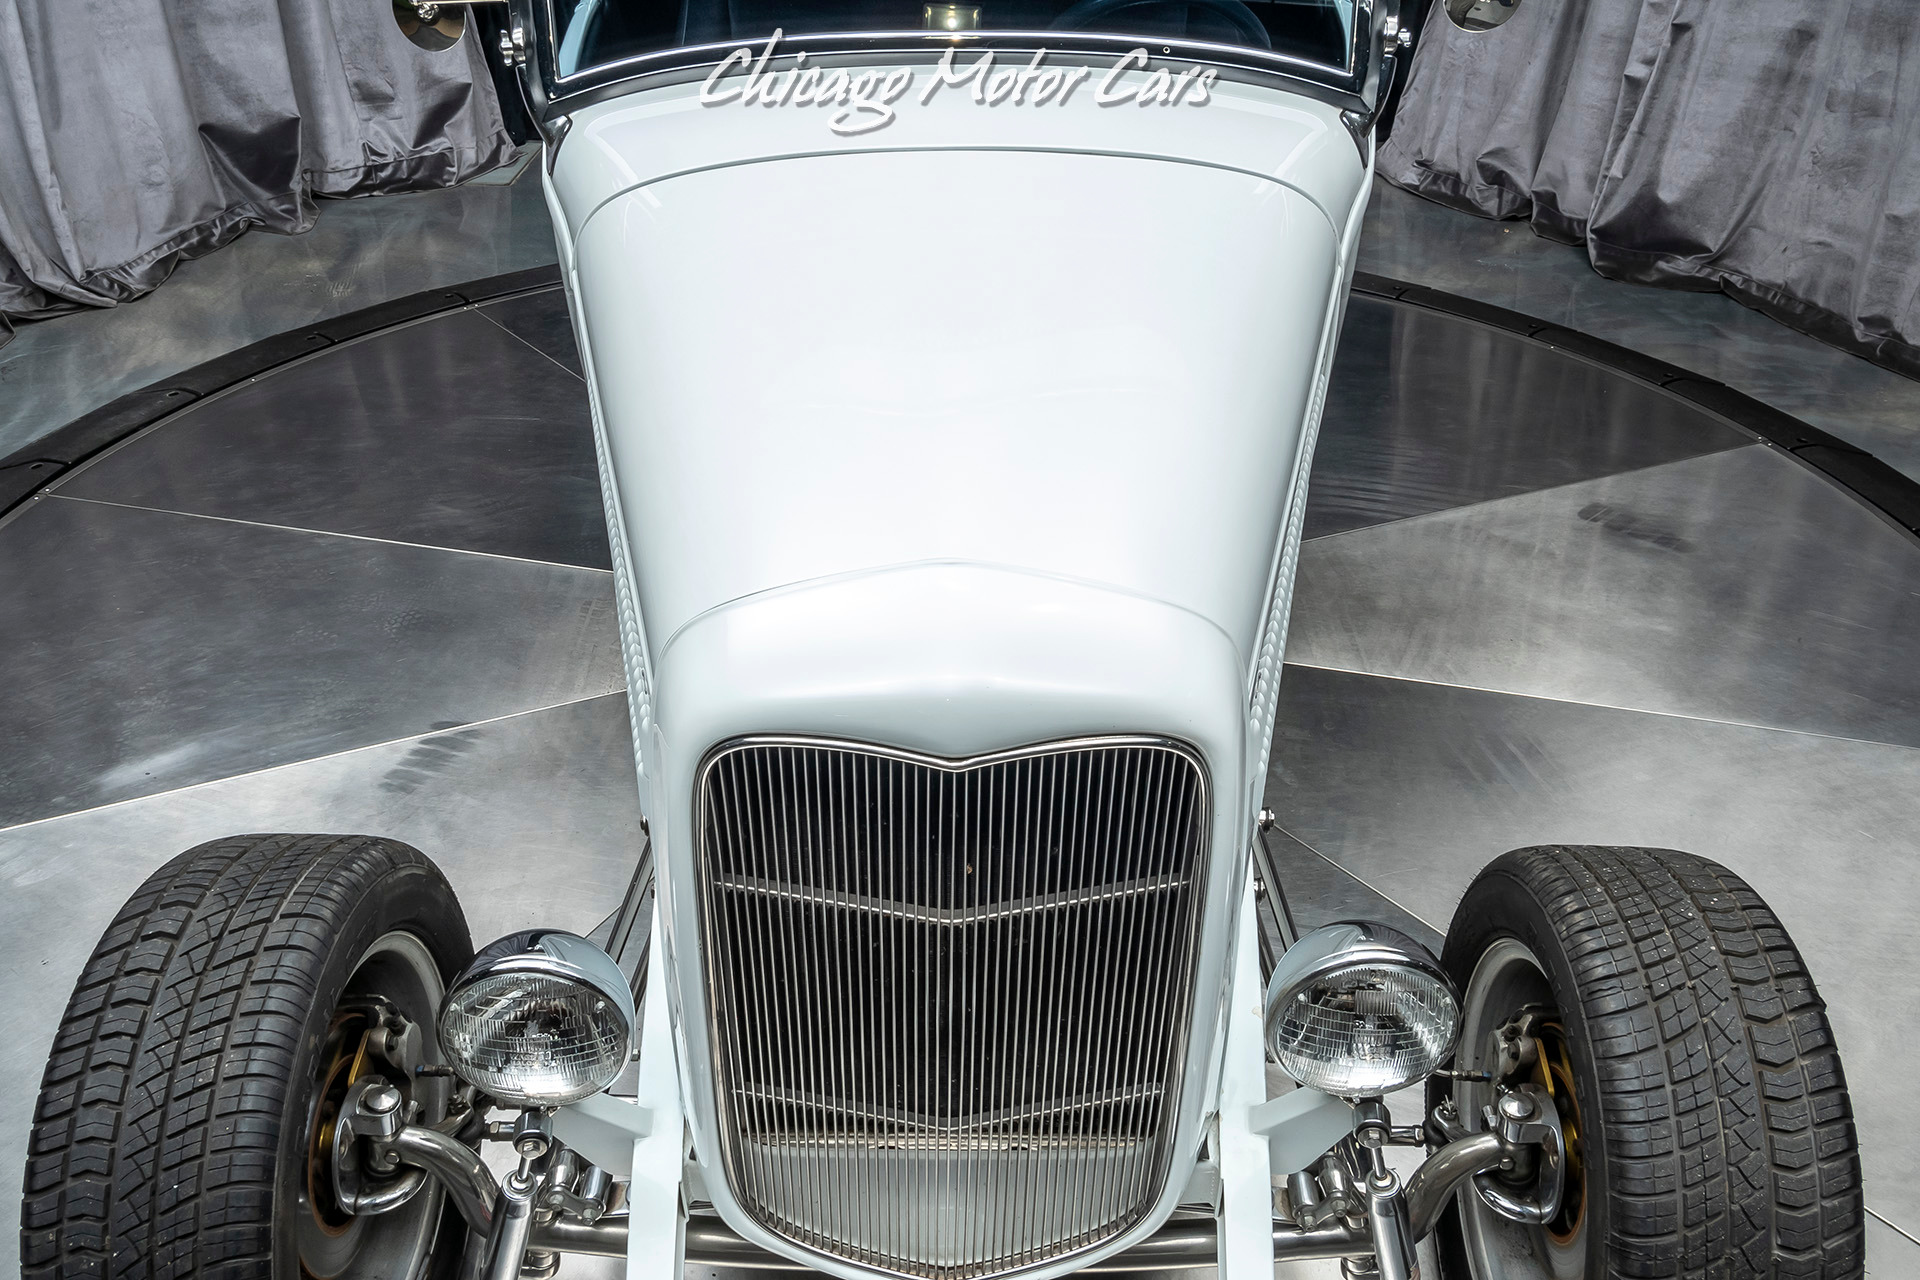 Used-1932-Ford-Custom-Roadster-BUILT-BY-MIDWEST-STREET-CUSTOMS-57-Liter-Chevrolet-350ci-V8-Engine